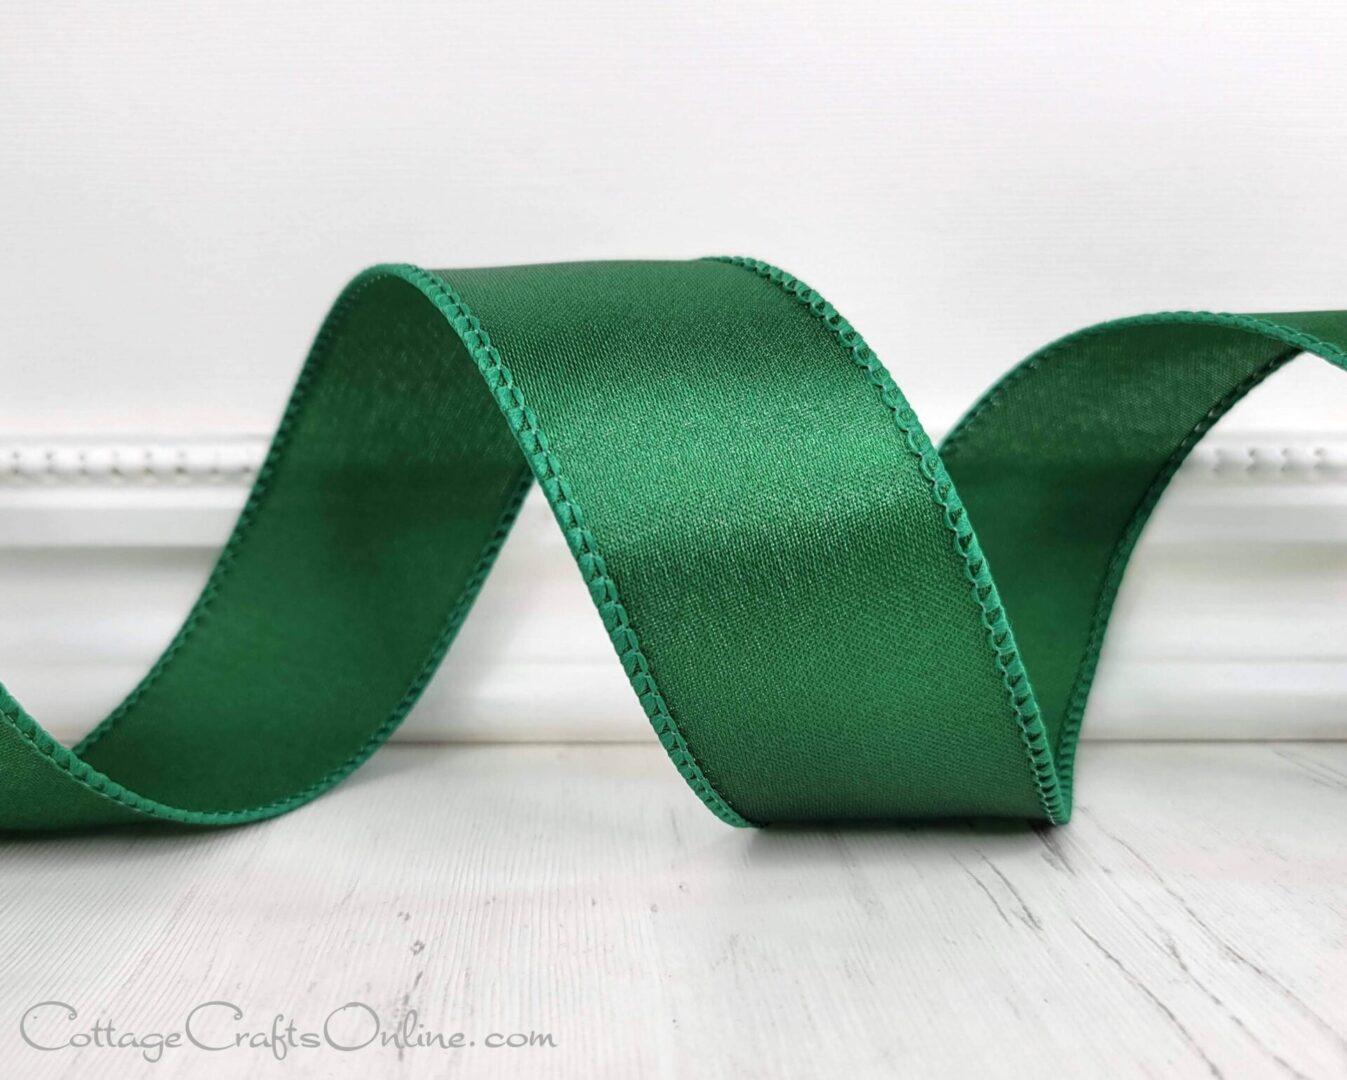 A green ribbon is sitting on the floor.